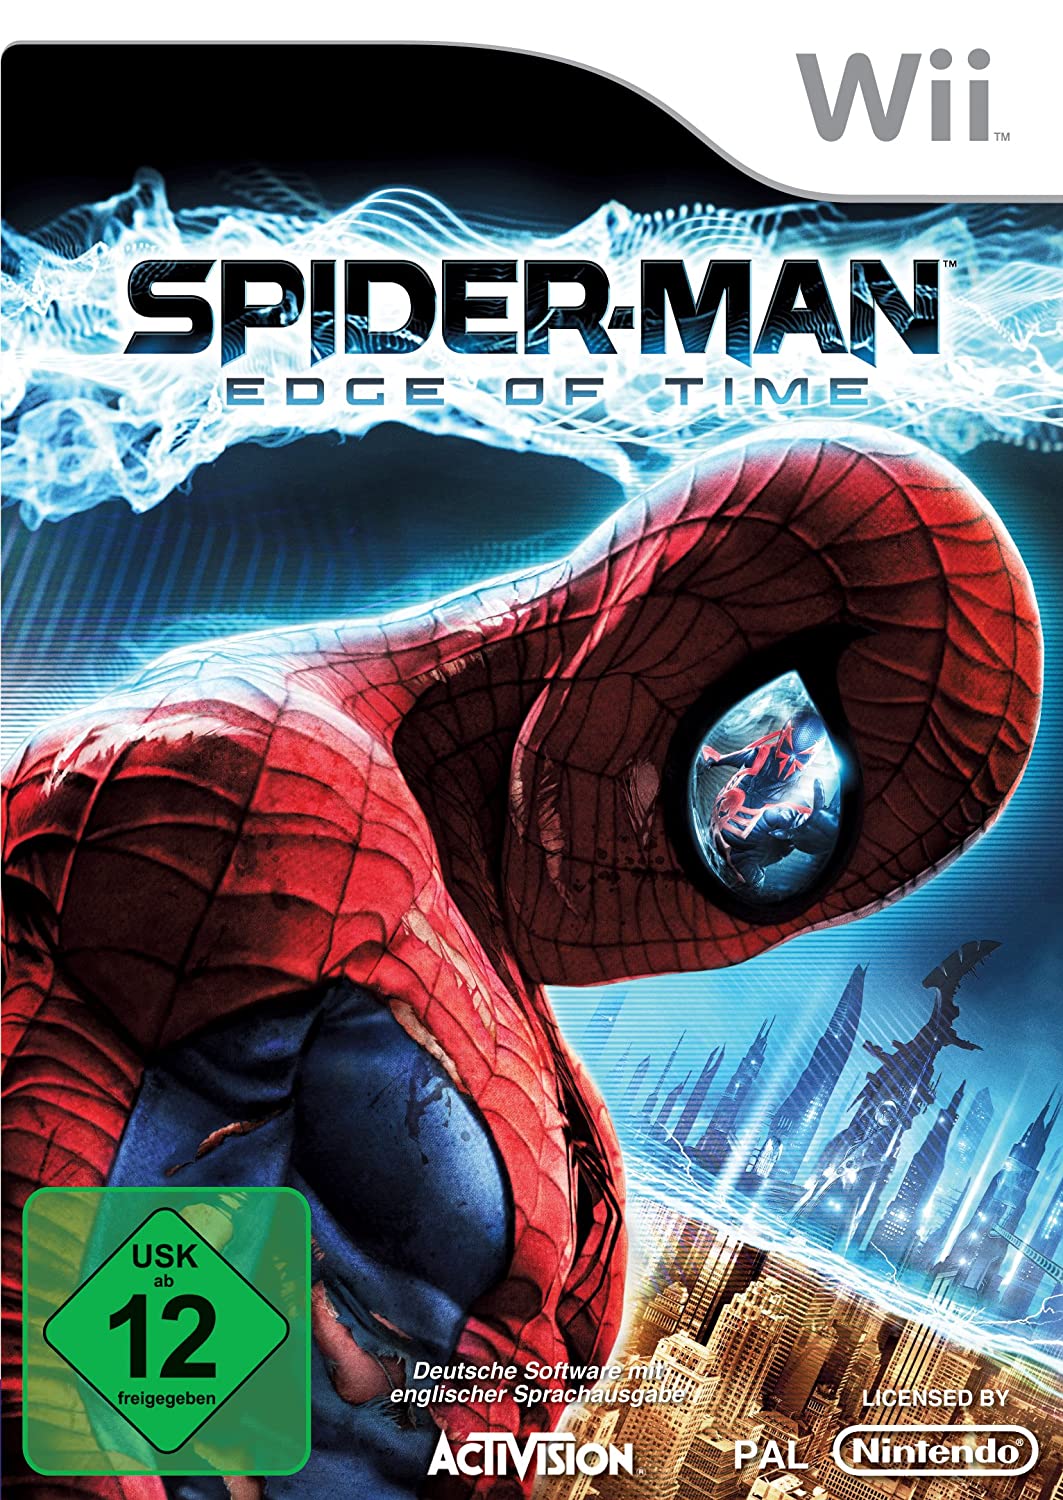 Spider-Man - Edge of Time